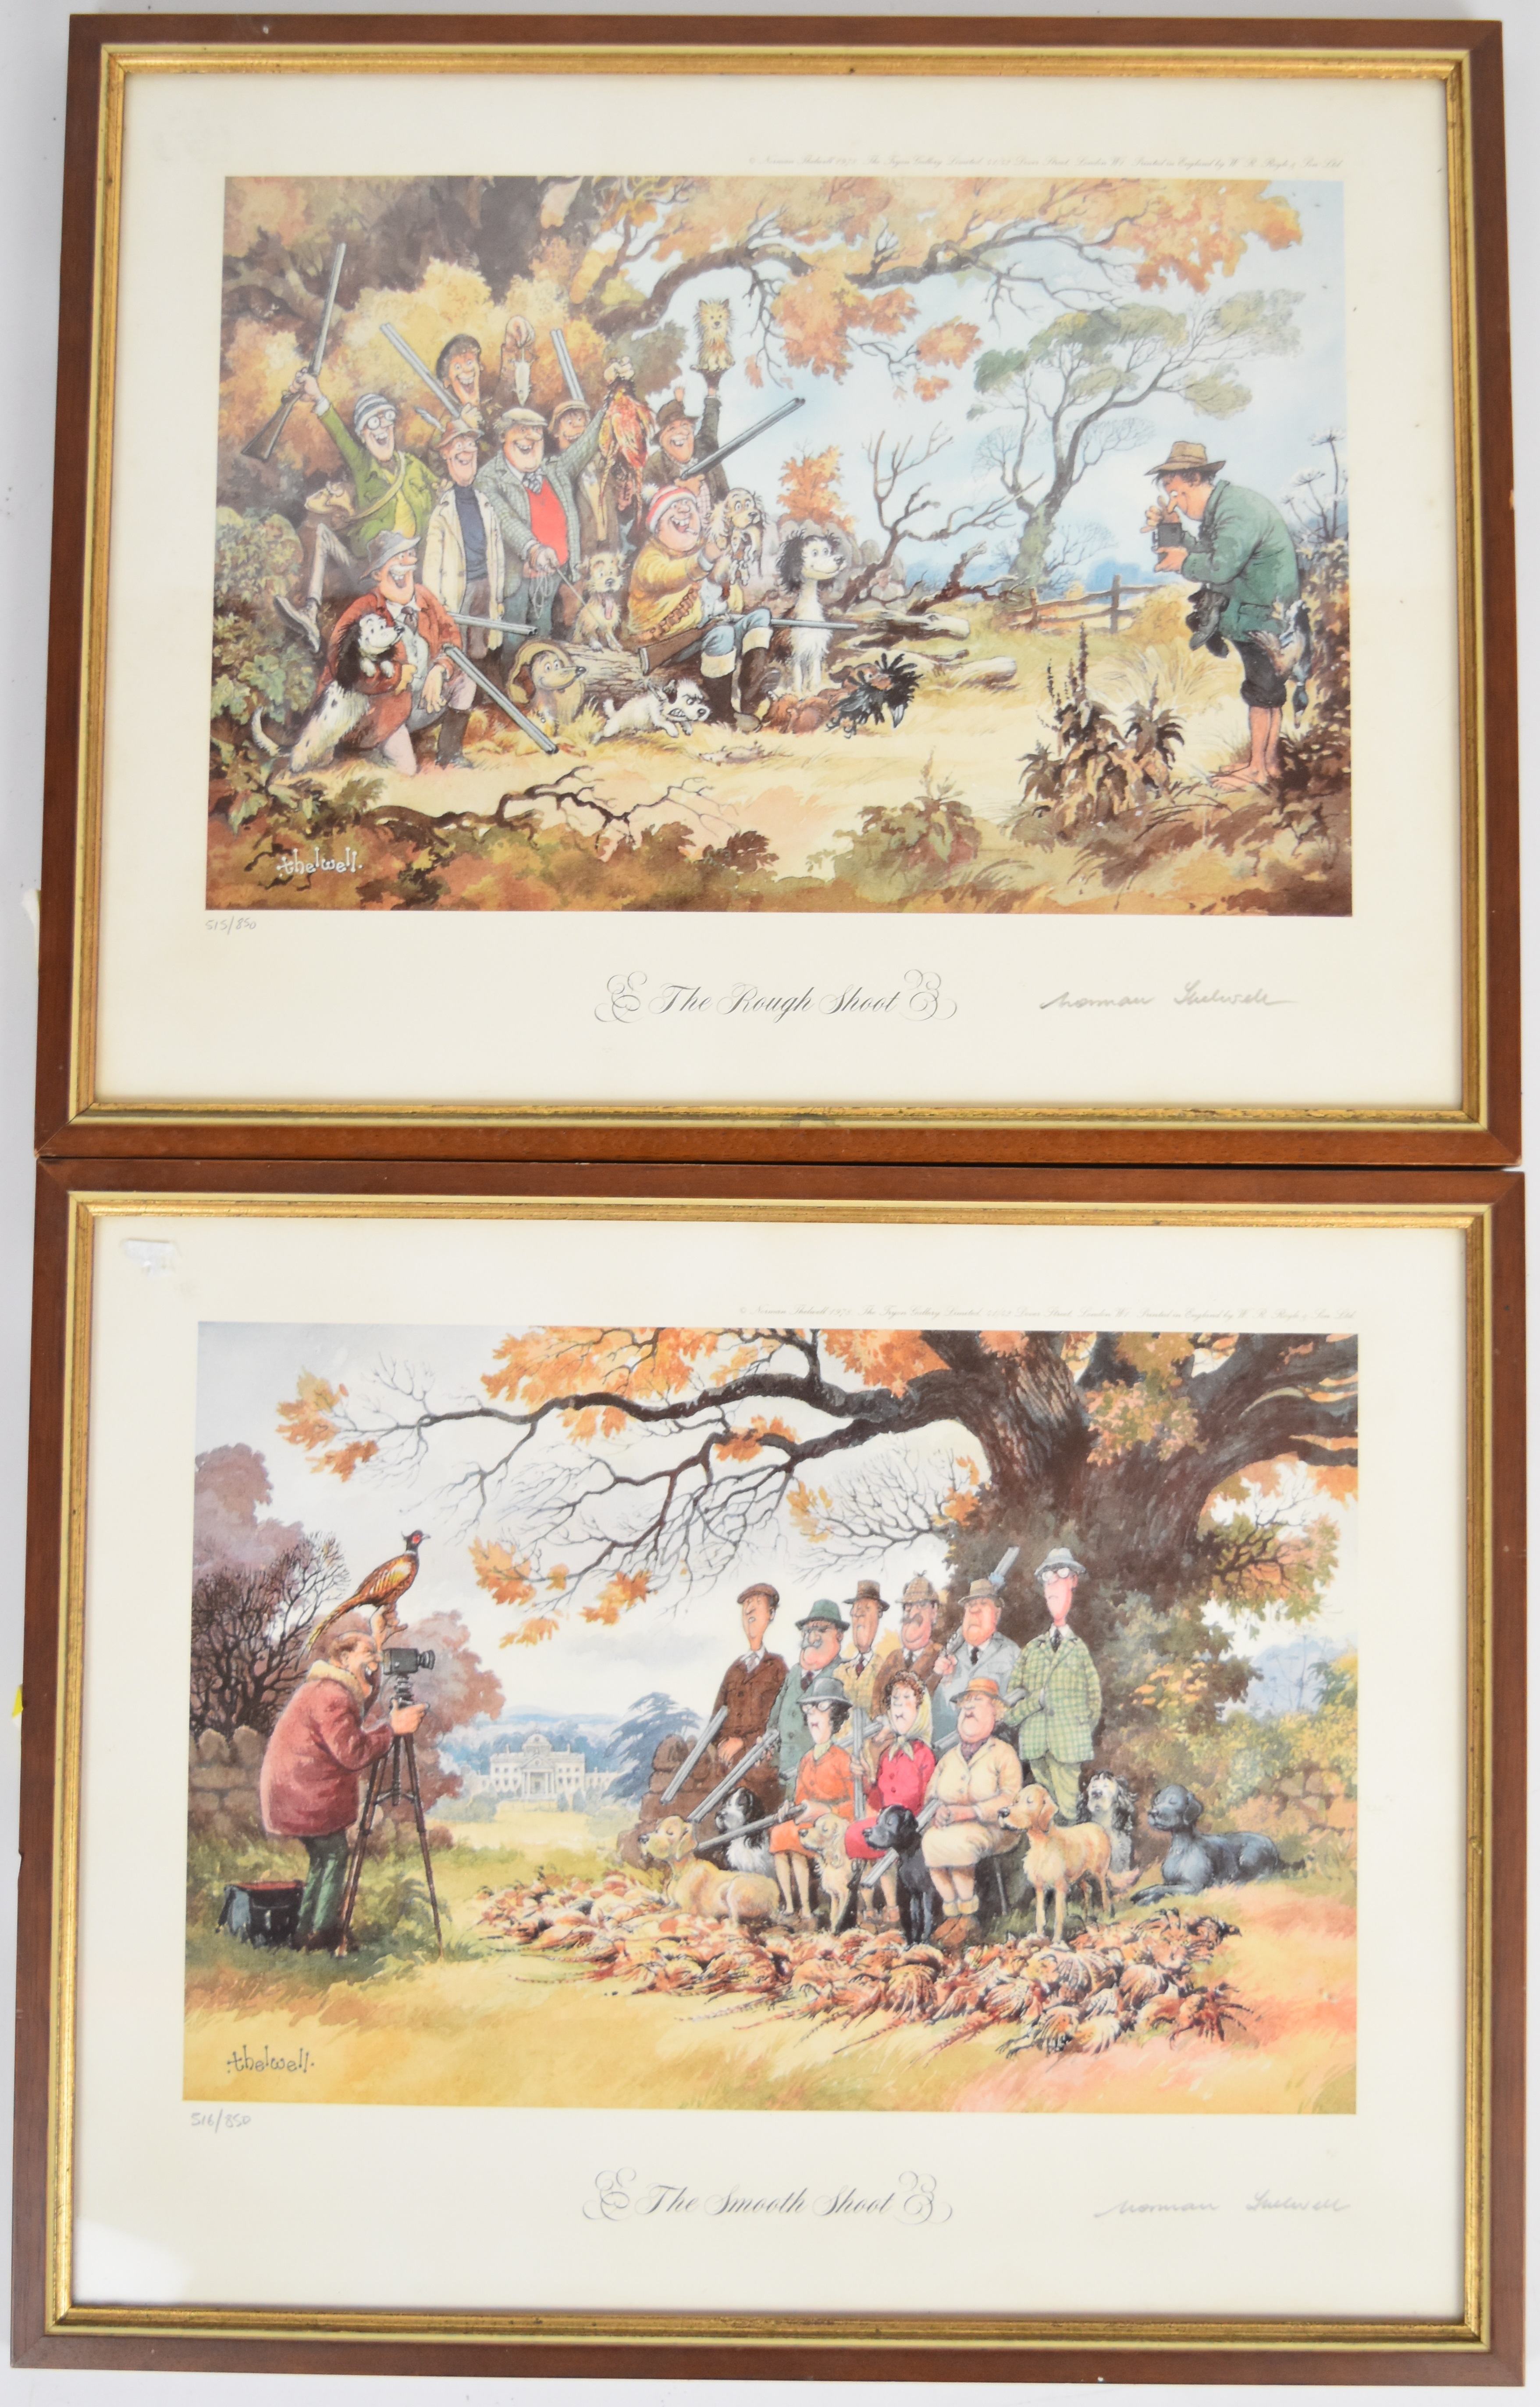 Two Norman Thelwell signed limited edition of 850 prints 'The Smooth Shoot' and 'The Royal Shoot',